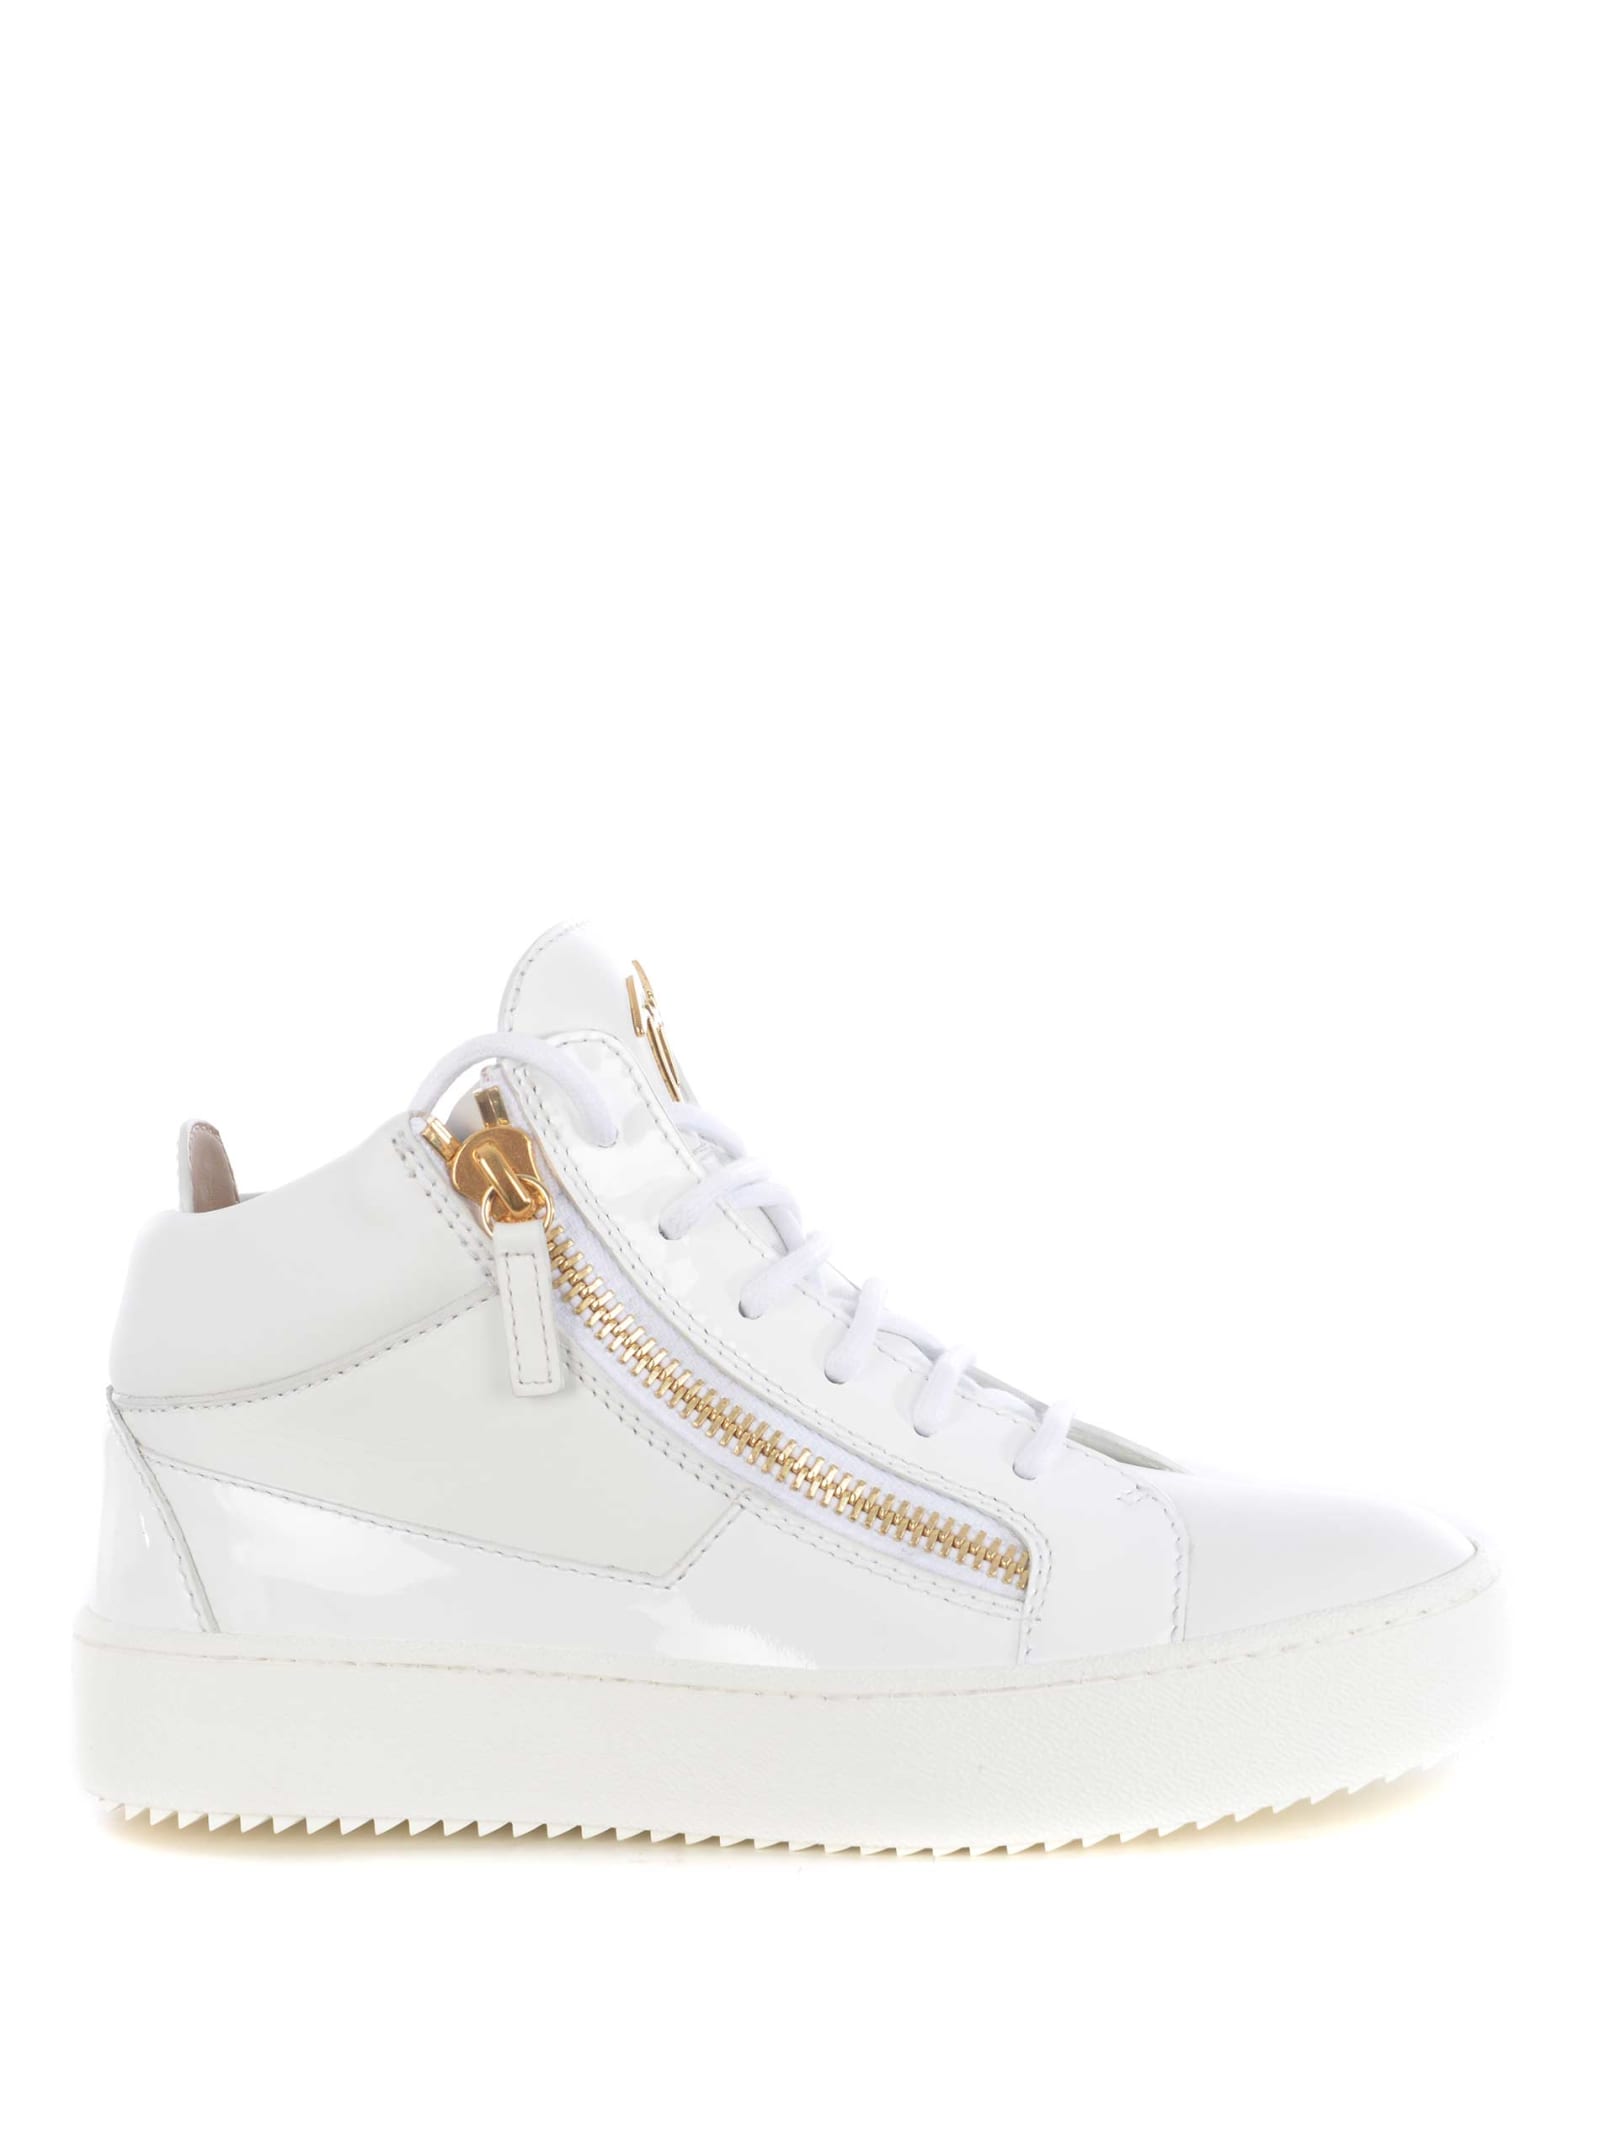 Giuseppe Zanotti Womens Hi-top Sneakers In Leather And Patent Leather